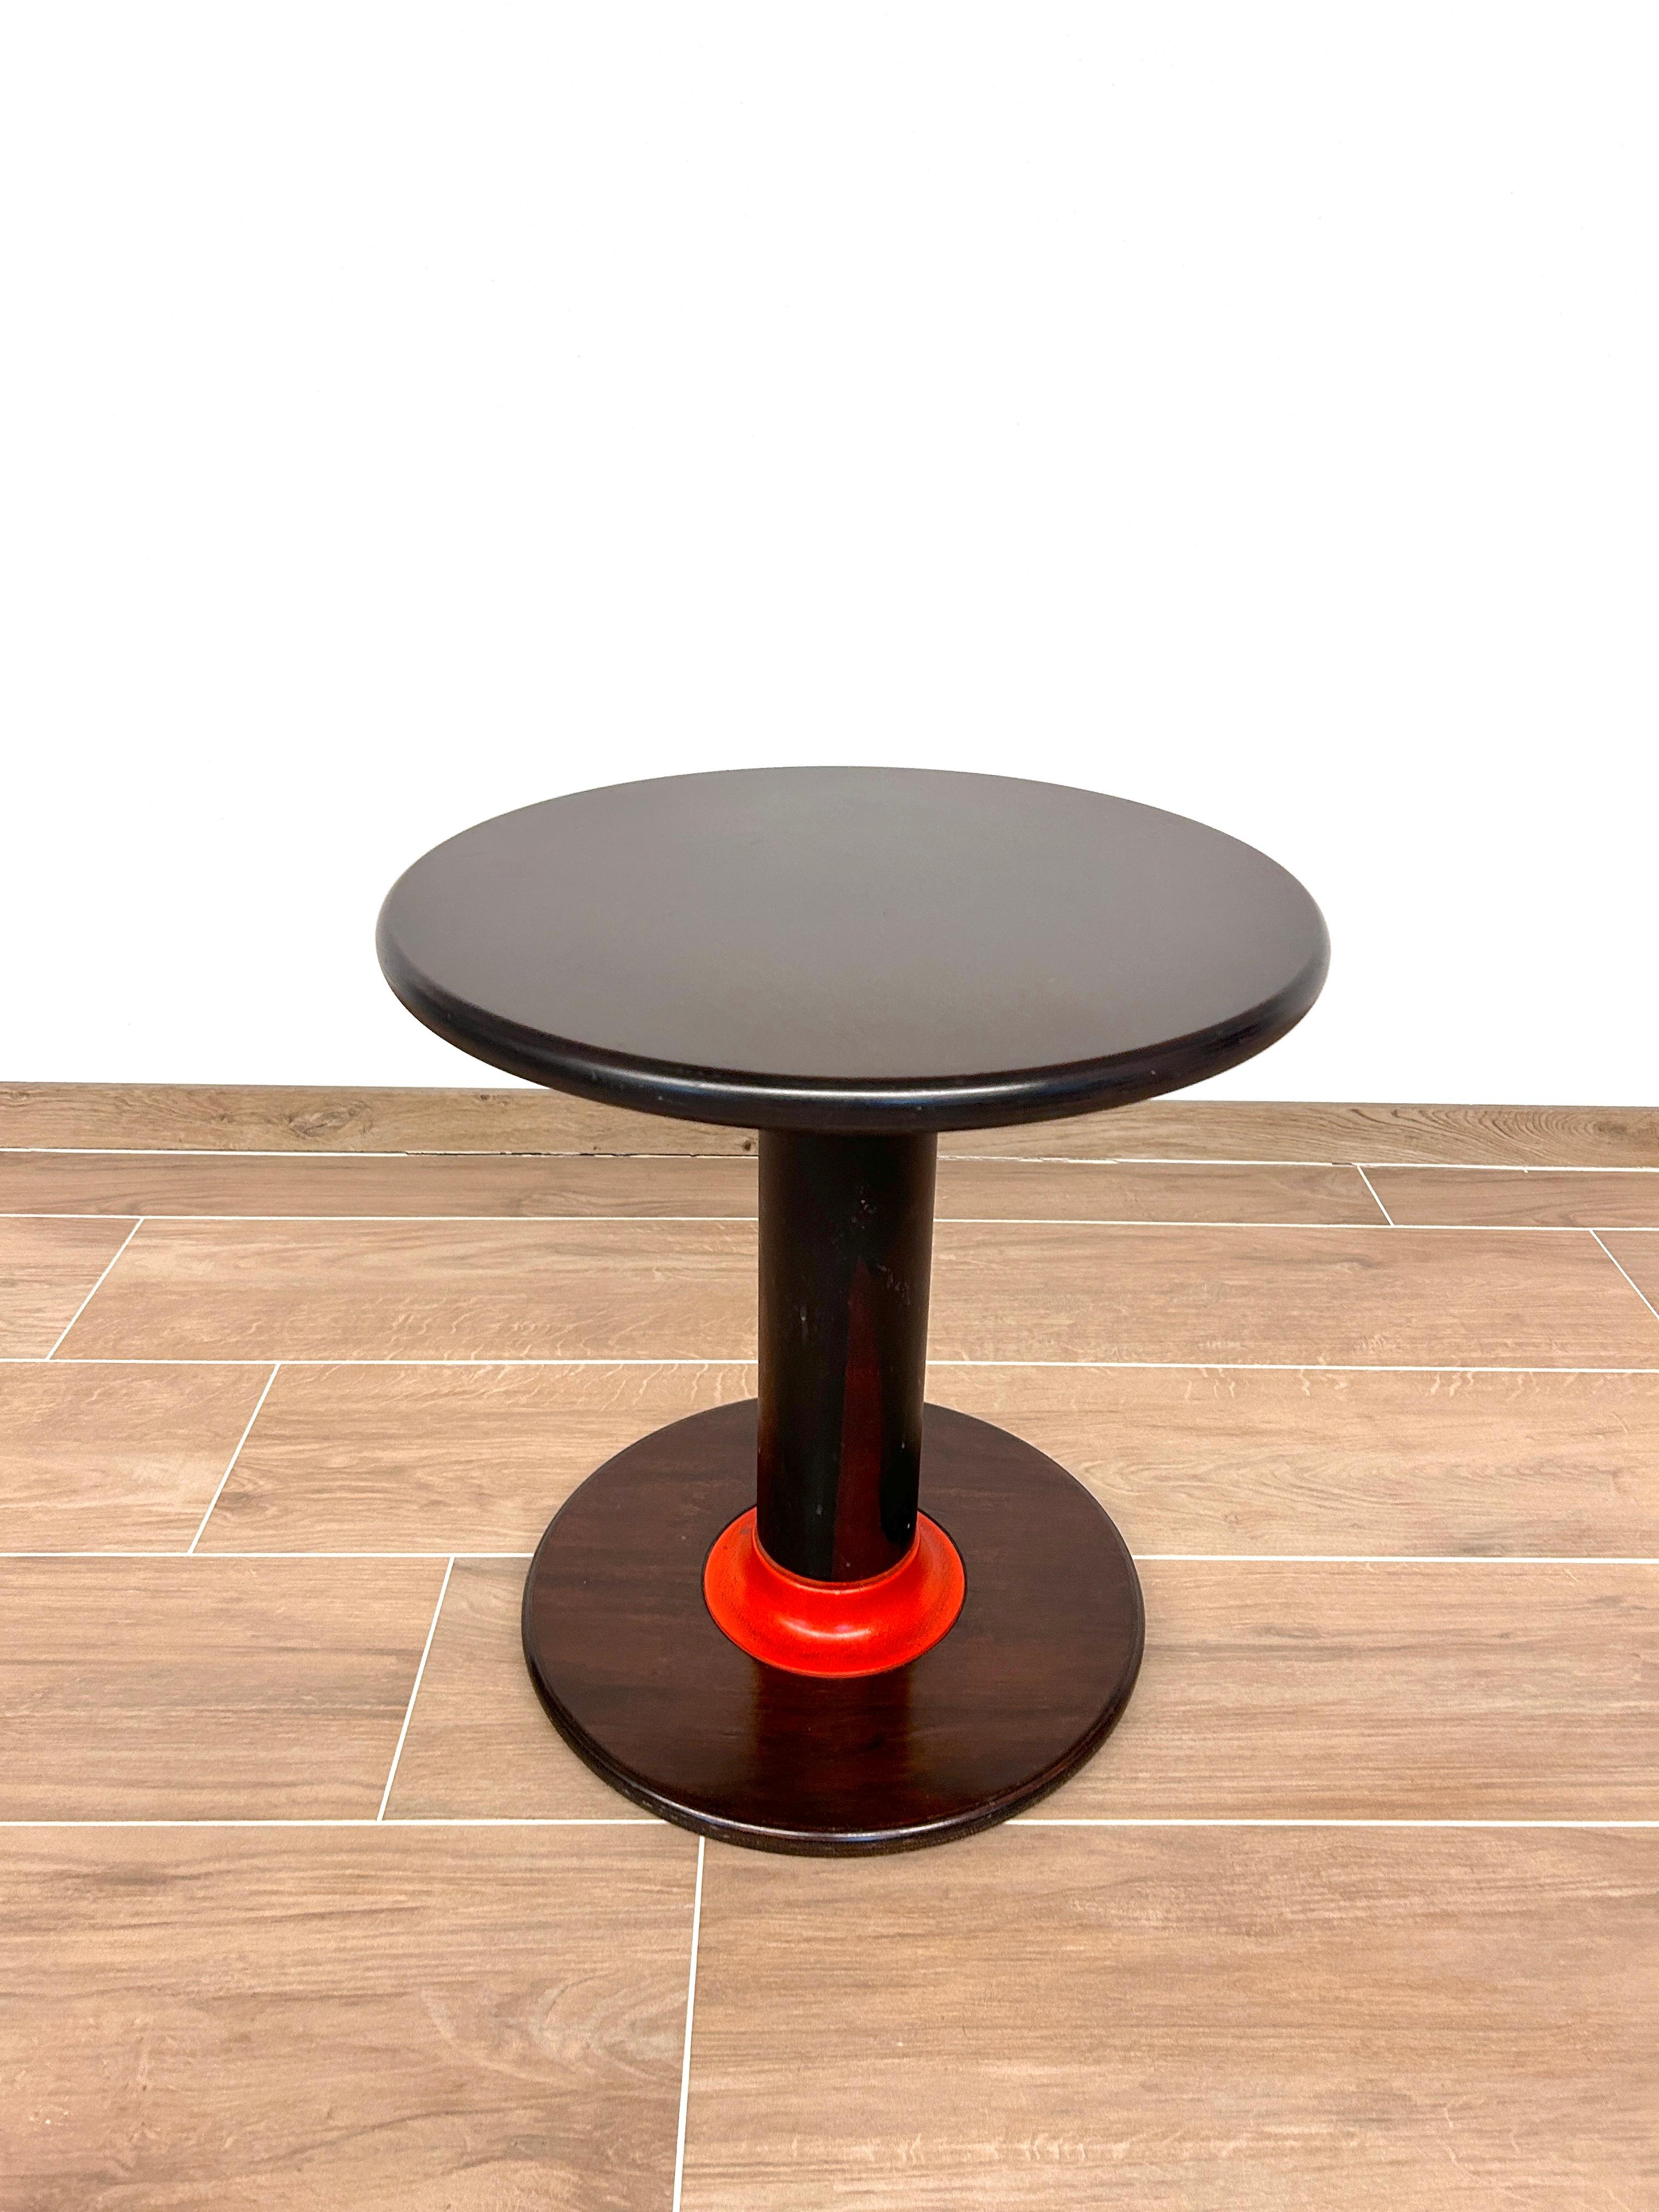 Italian Side Table Mod. Rocchetto By Ettore Sottsass for Poltronova, 1964 For Sale